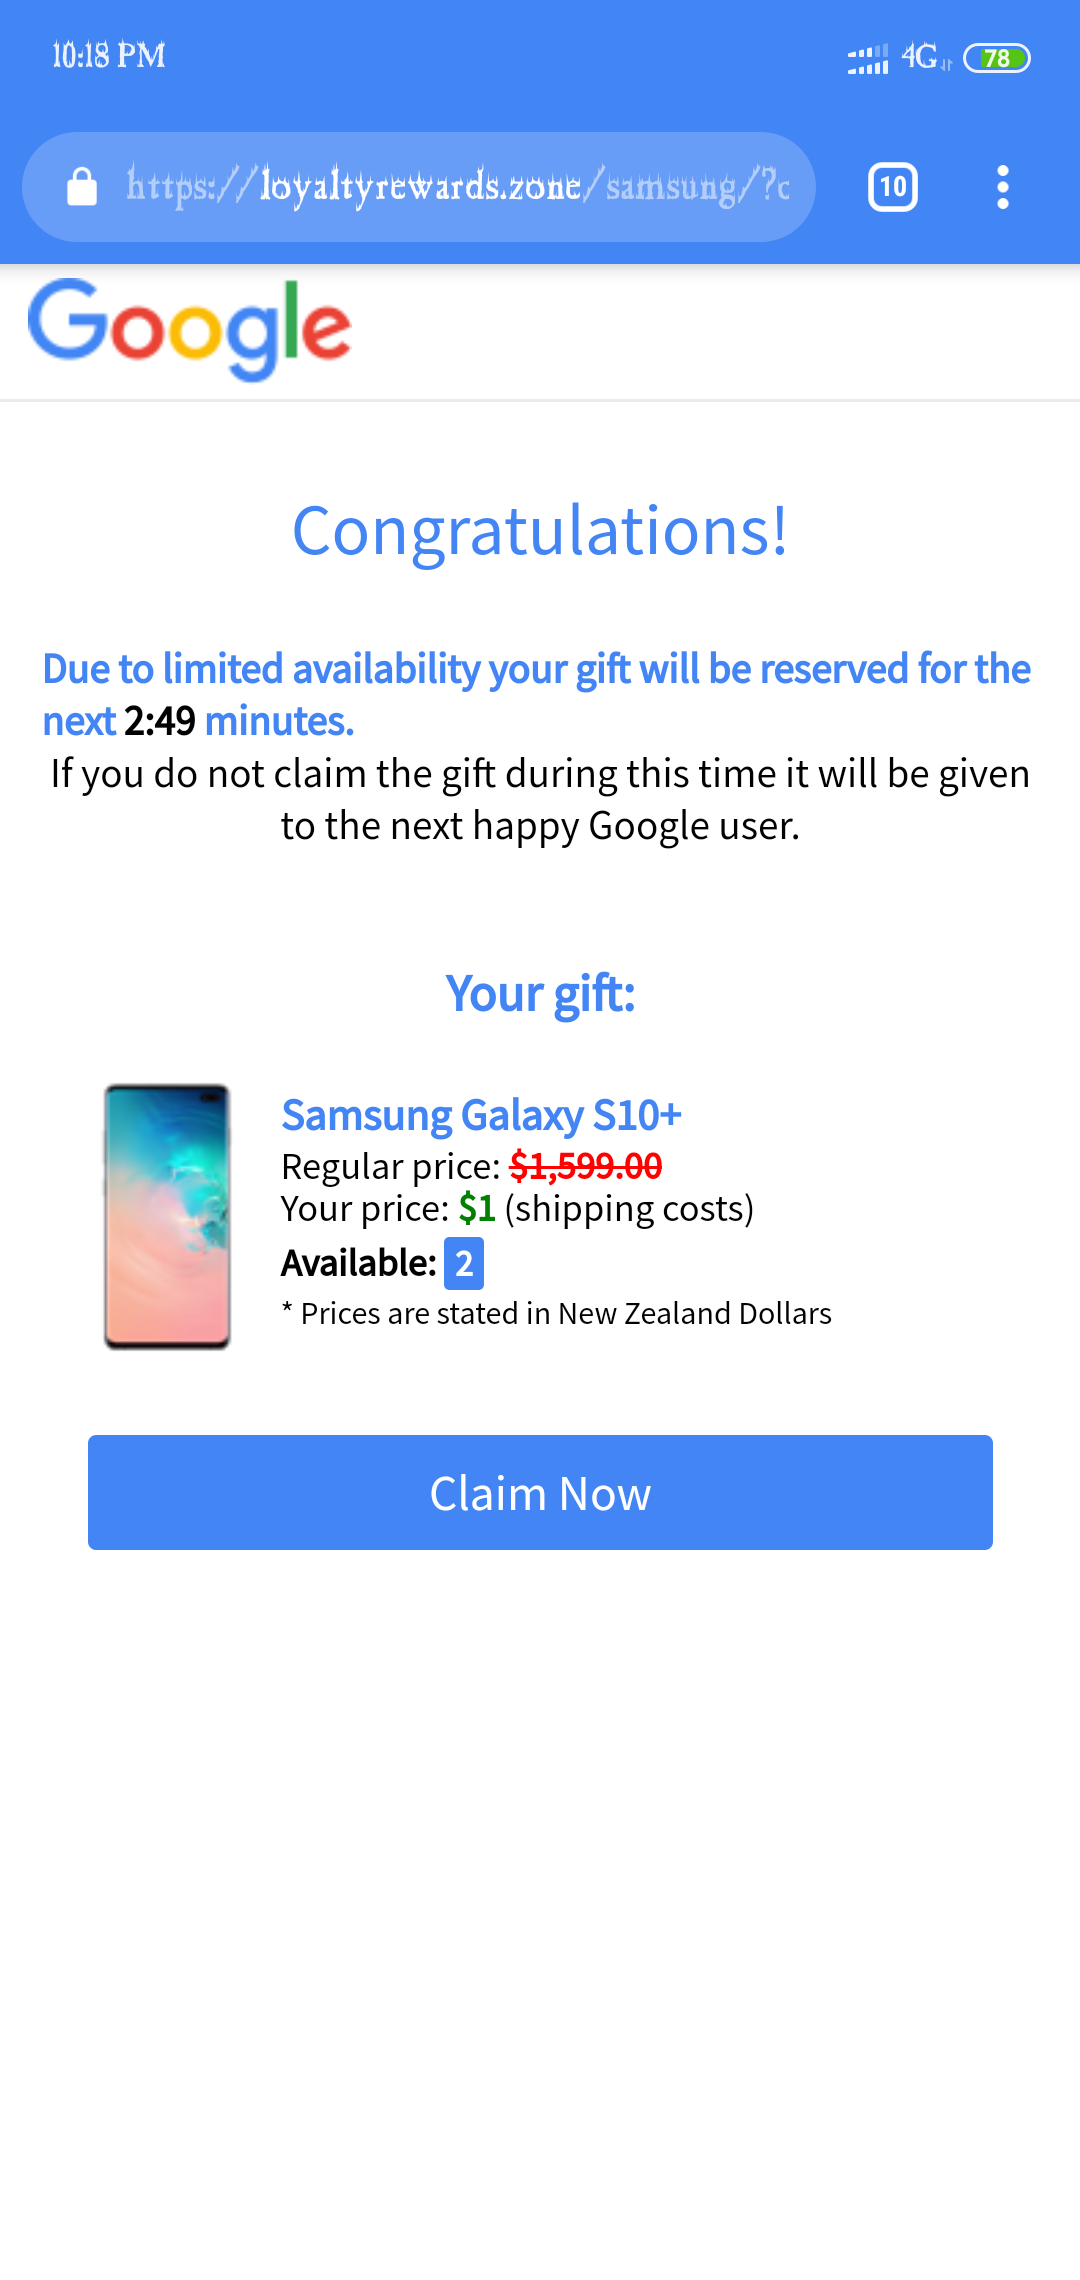 samsung promotion asks for wifi mac scam